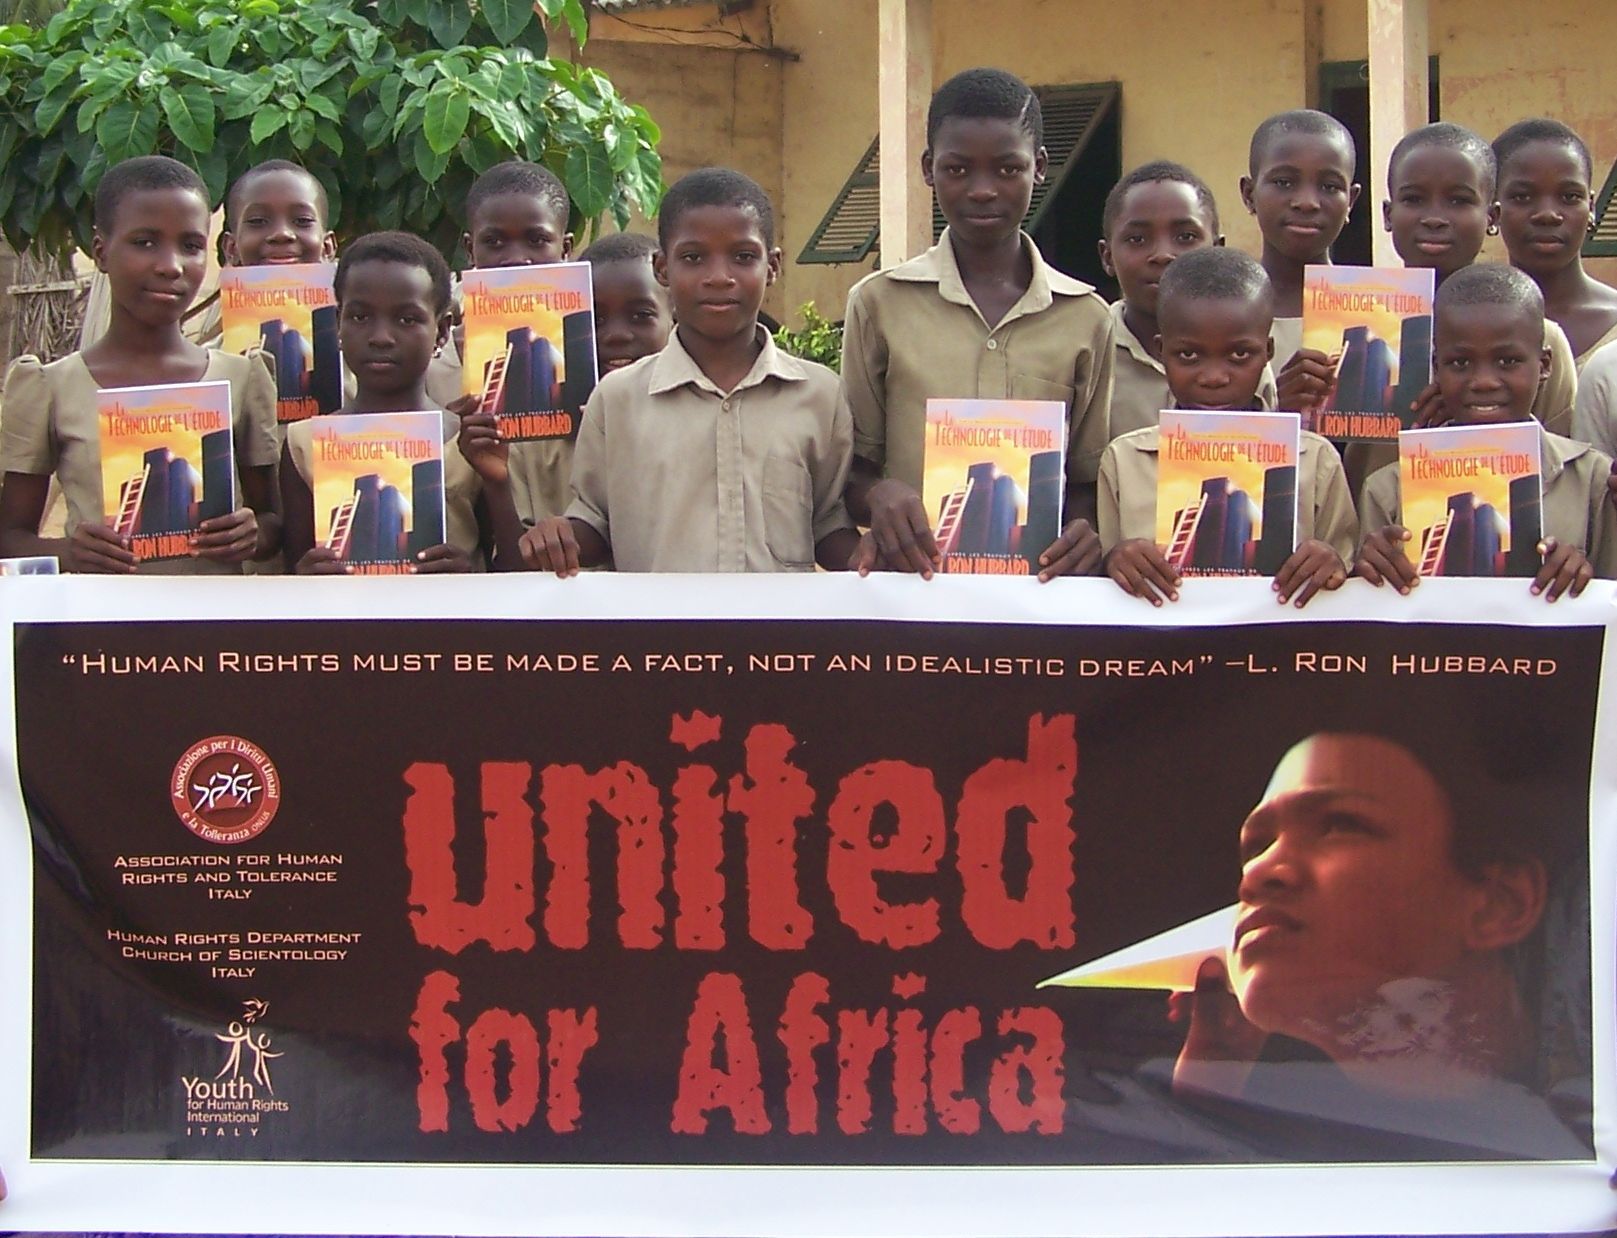 United for Africa provided The Technology of Study booklets to these children in Togo.